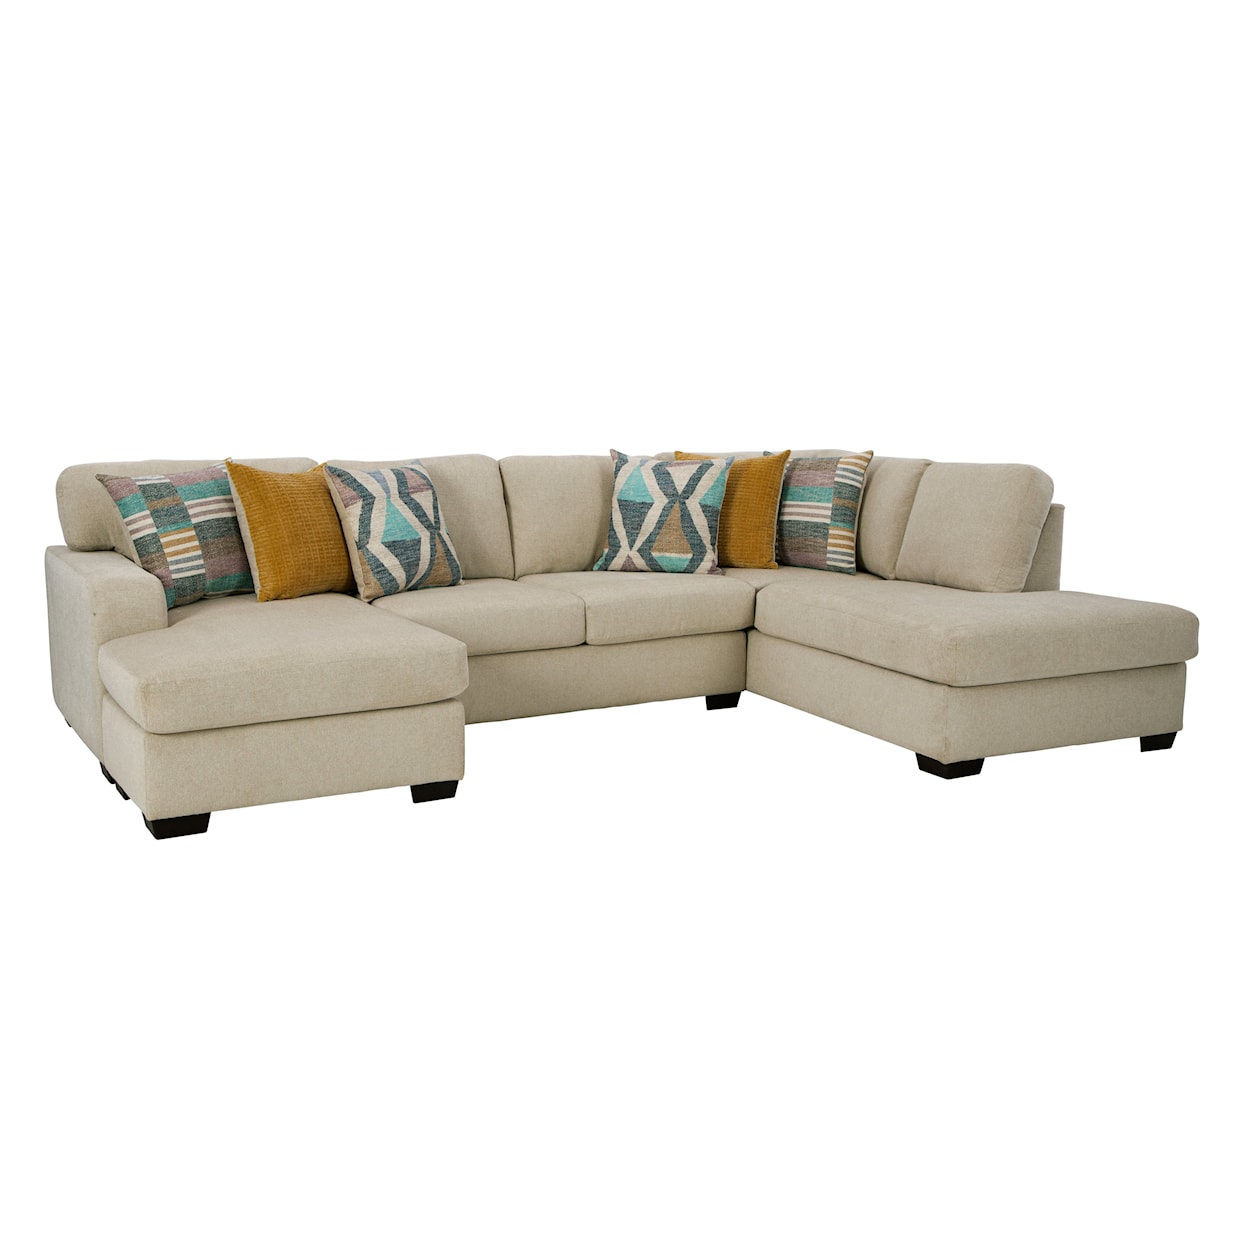 Behold Home BH1671 Gracie Sectional Sofa